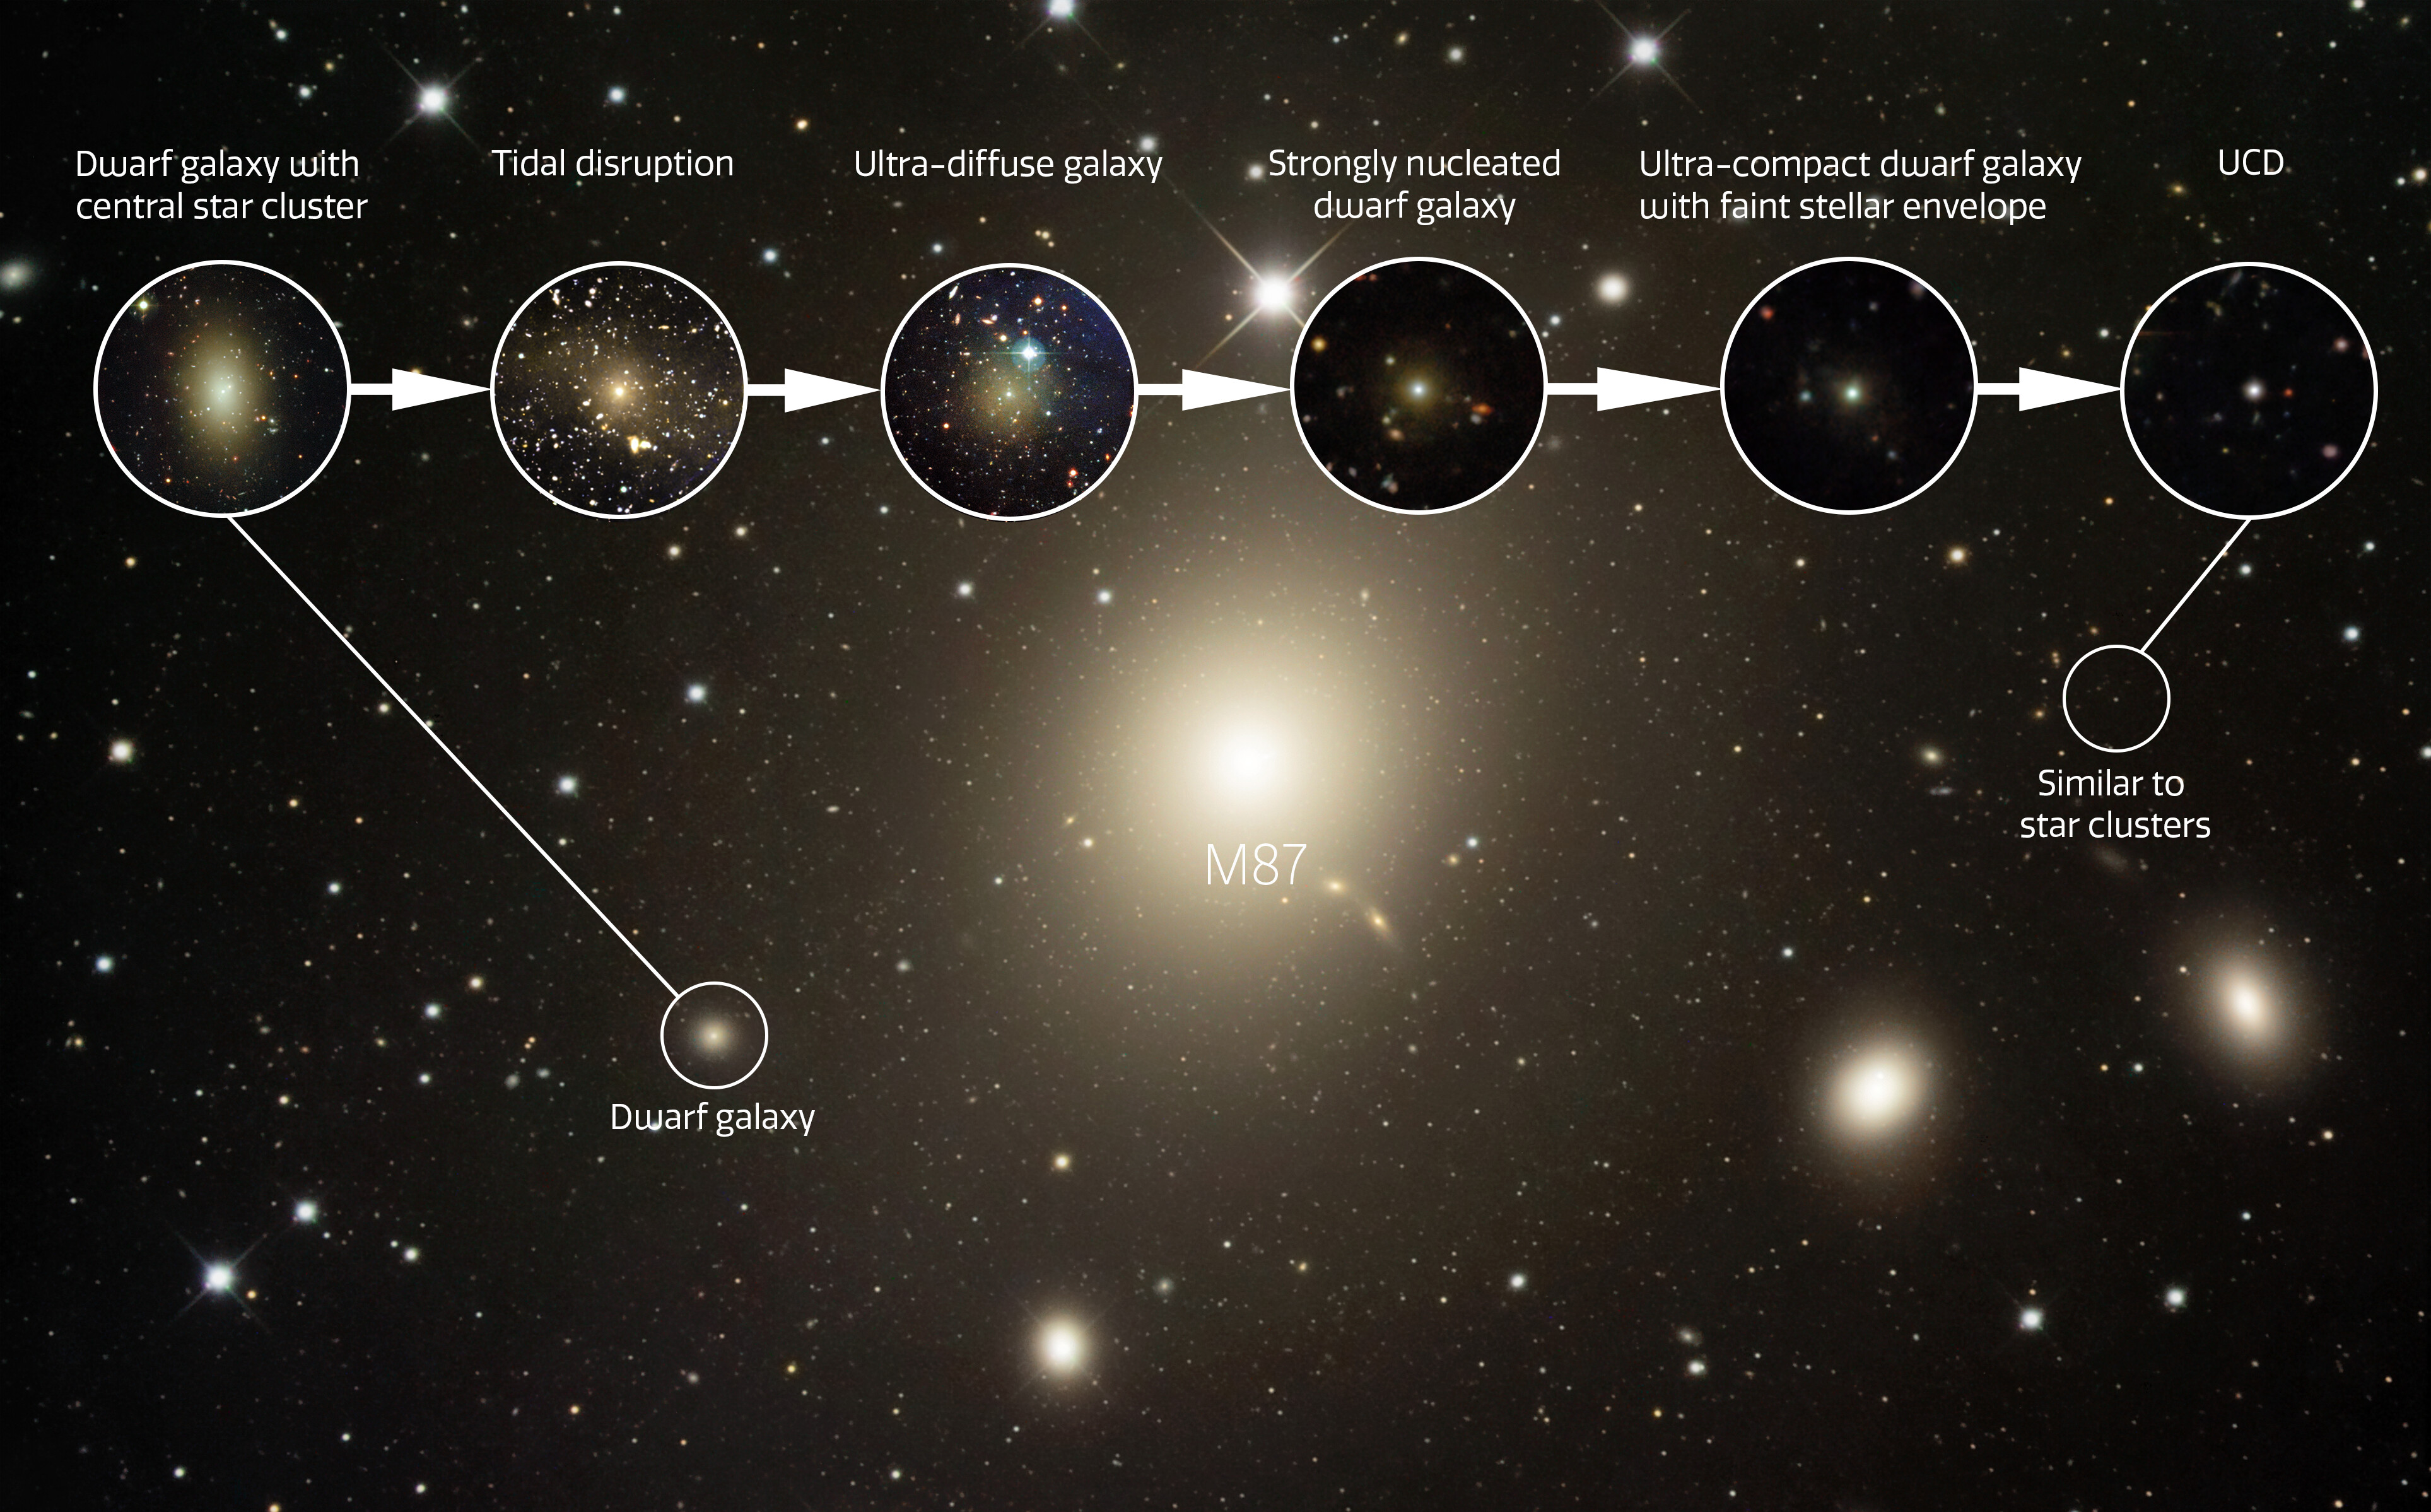 Image showing a continuum of galaxies captured at different stages of the transformation process from a dwarf galaxy to an ultra-compact dwarf galaxy.